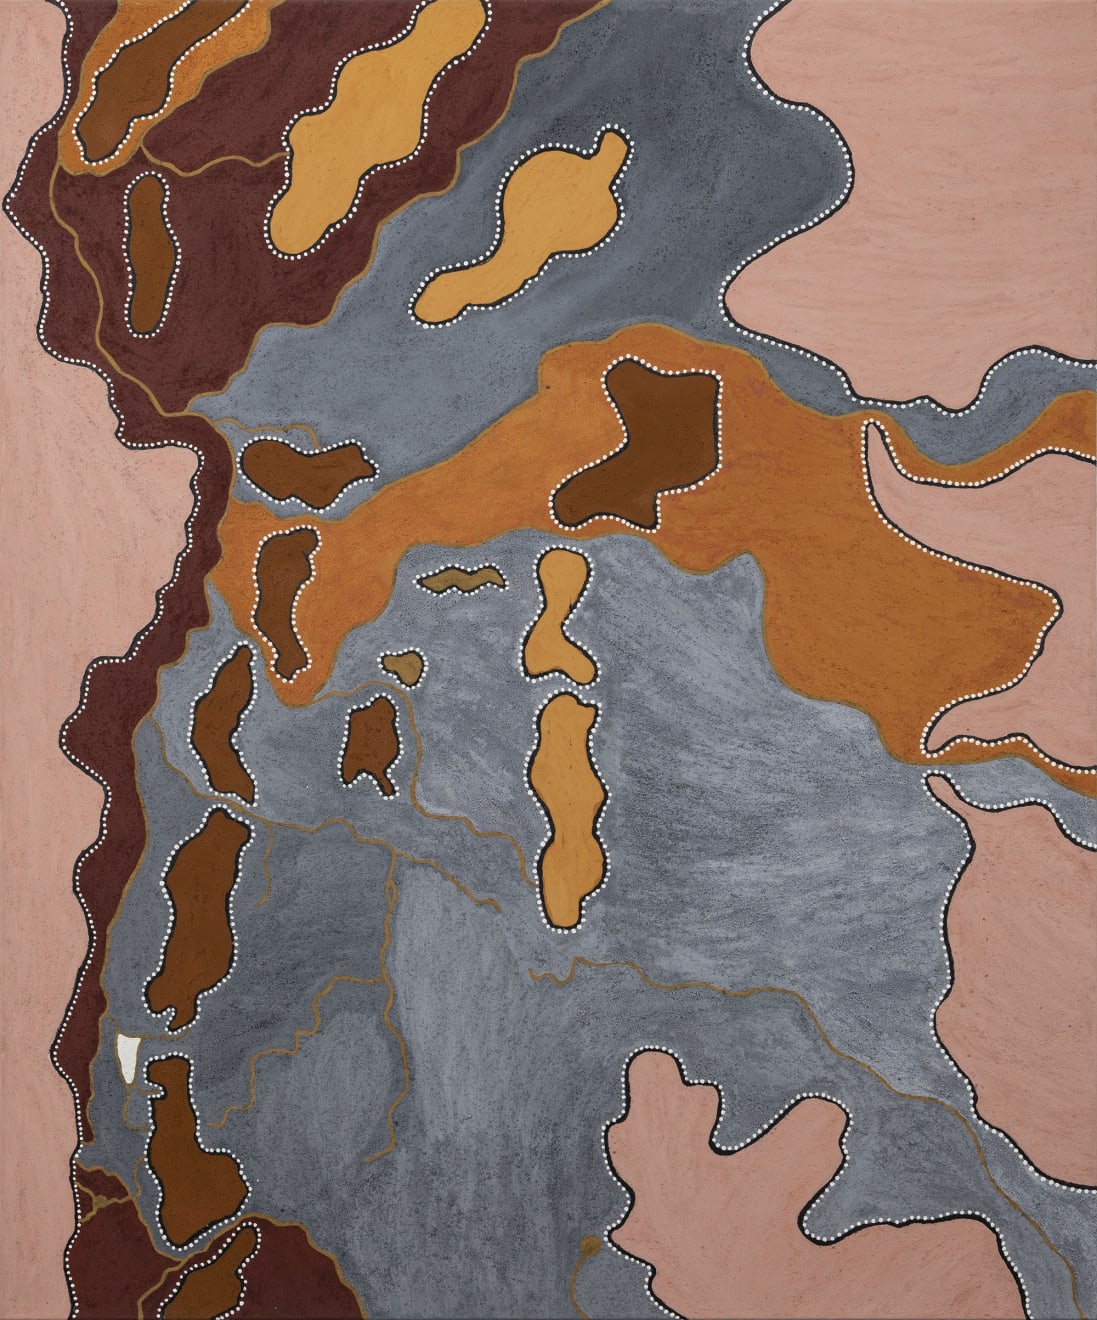 Lindsay Malay, Little Fitzroy River Catchment, 2018